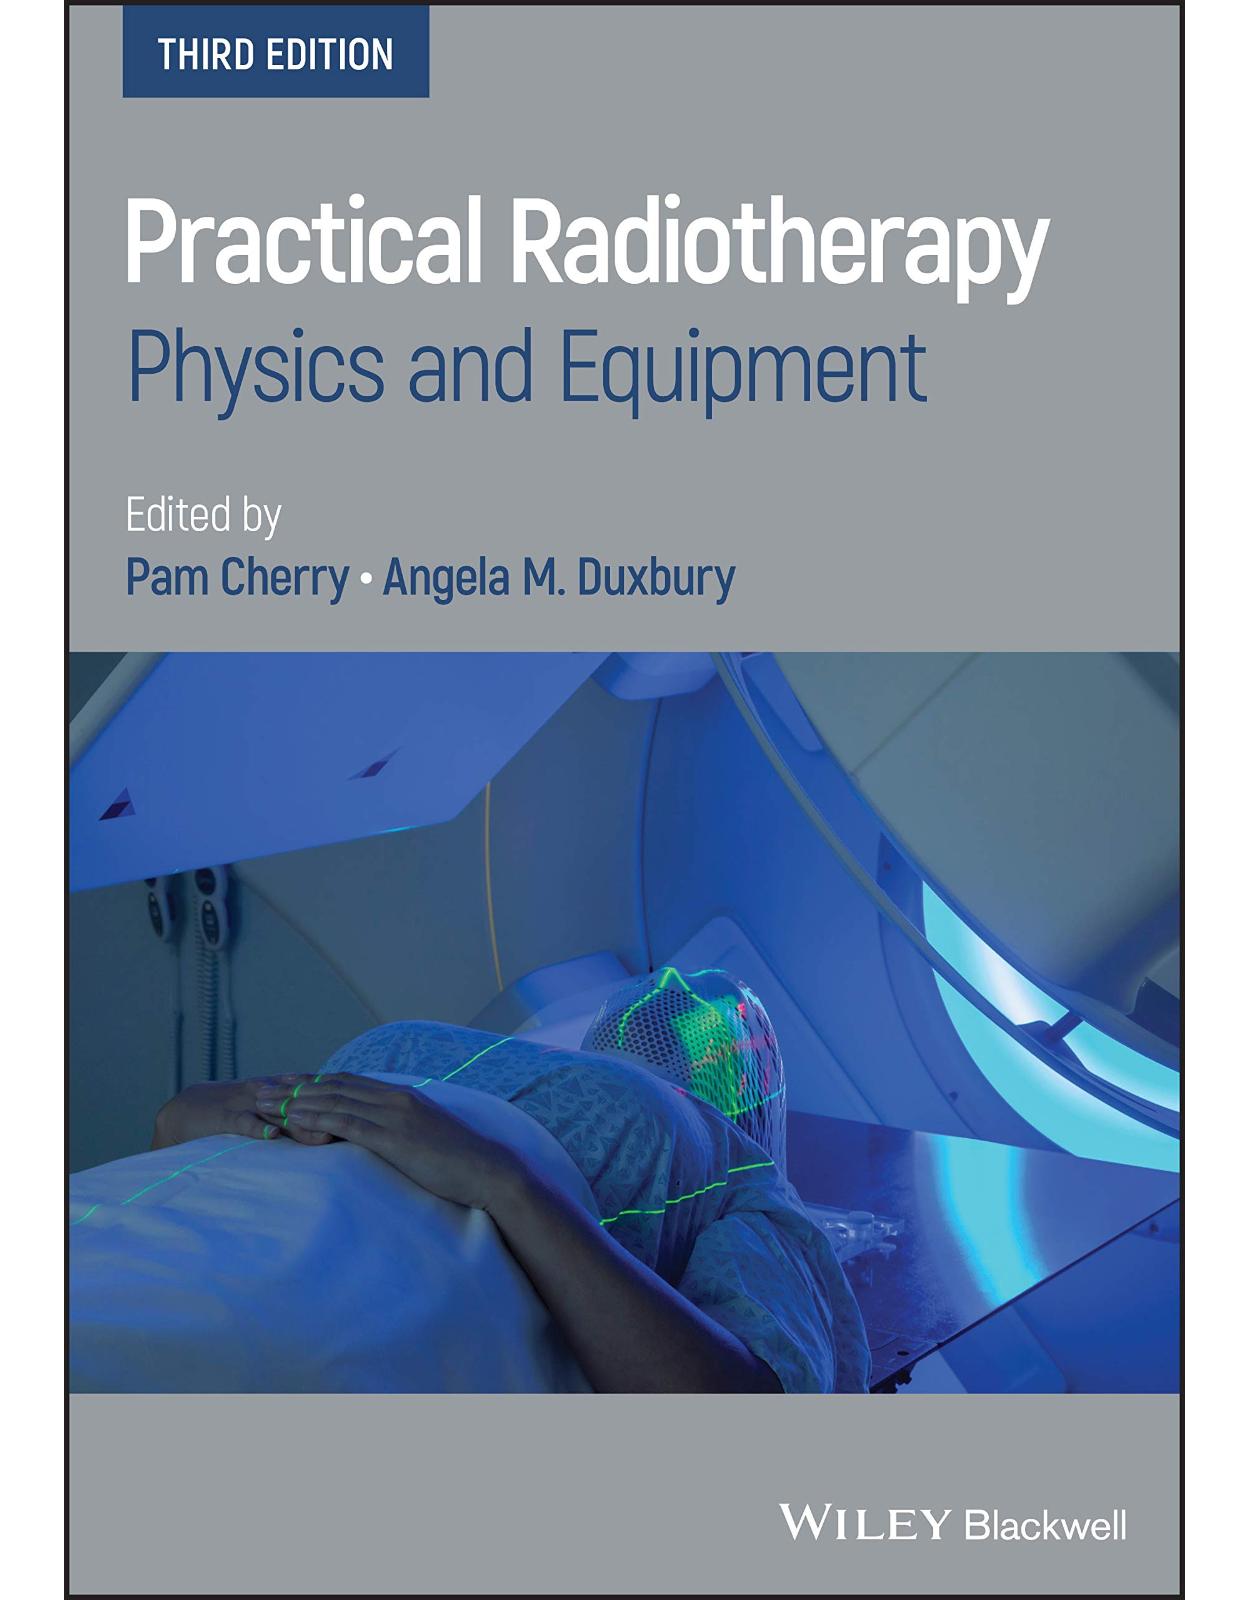 Practical Radiotherapy: Physics and Equipment, 3rd Edition